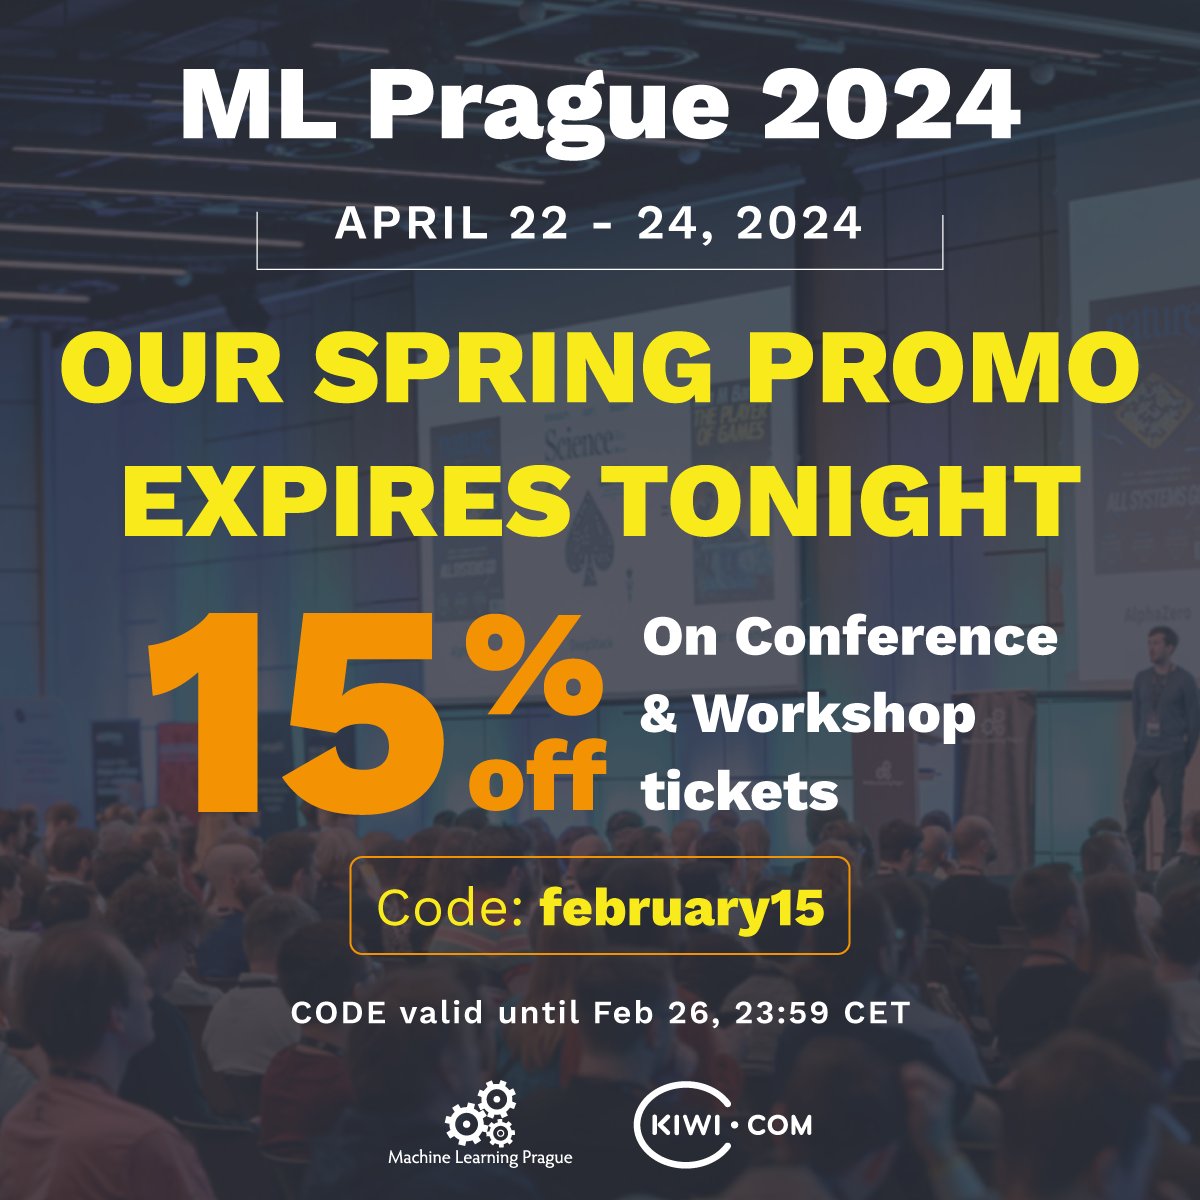 ⏳ Hurry up! Our 15% Spring Promo expires tonight ⏳ Use code 'february15' at checkout and save up to €73 on your conference, workshop, or combined tickets. 👉 Register at mlprague.com #mlprague #mlprague2024 #machinelearning #AI #conferences2024 #conference